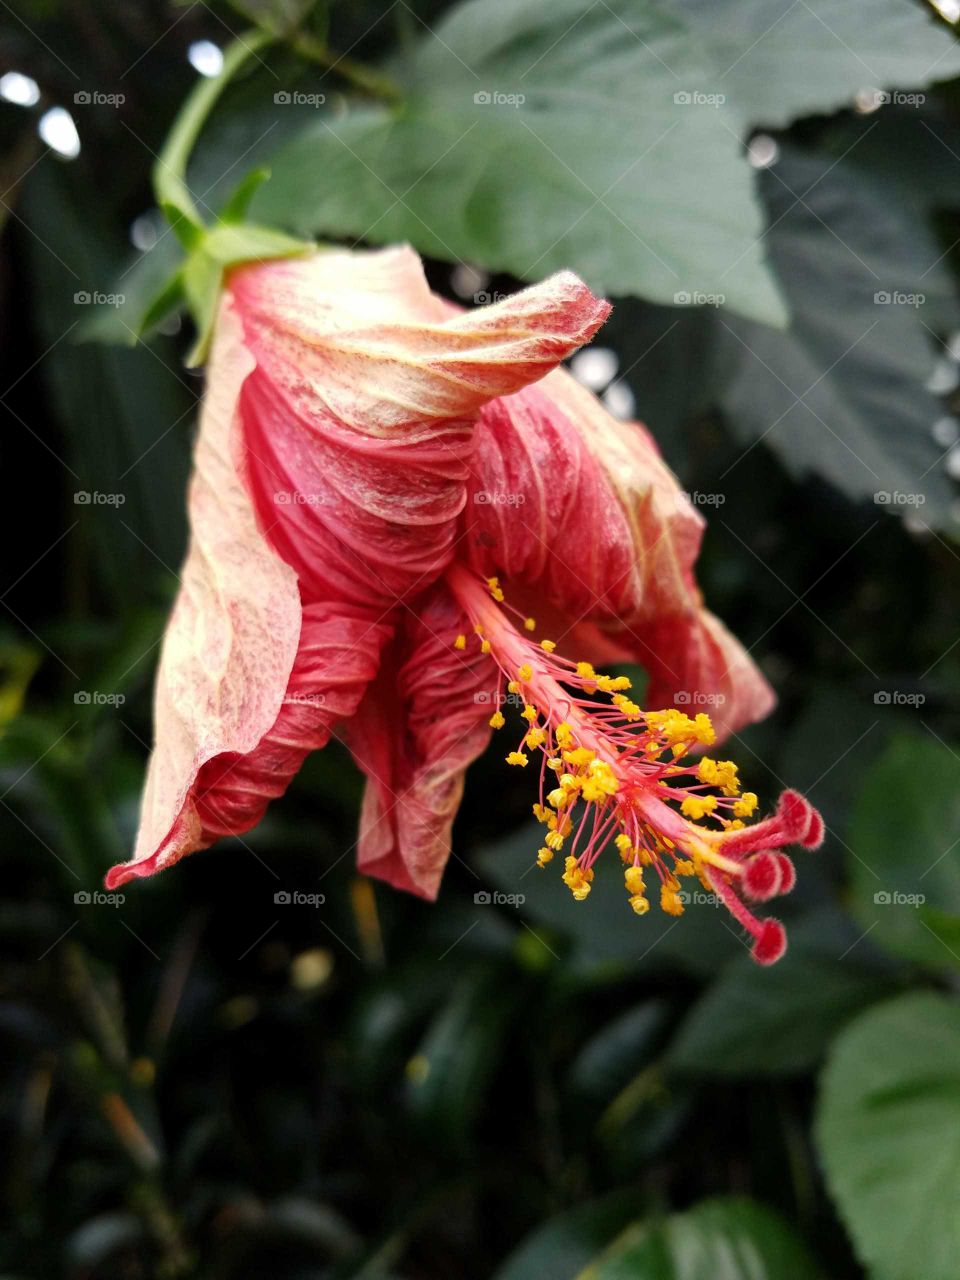 Portrait of a Hibiscus flower putting on a show